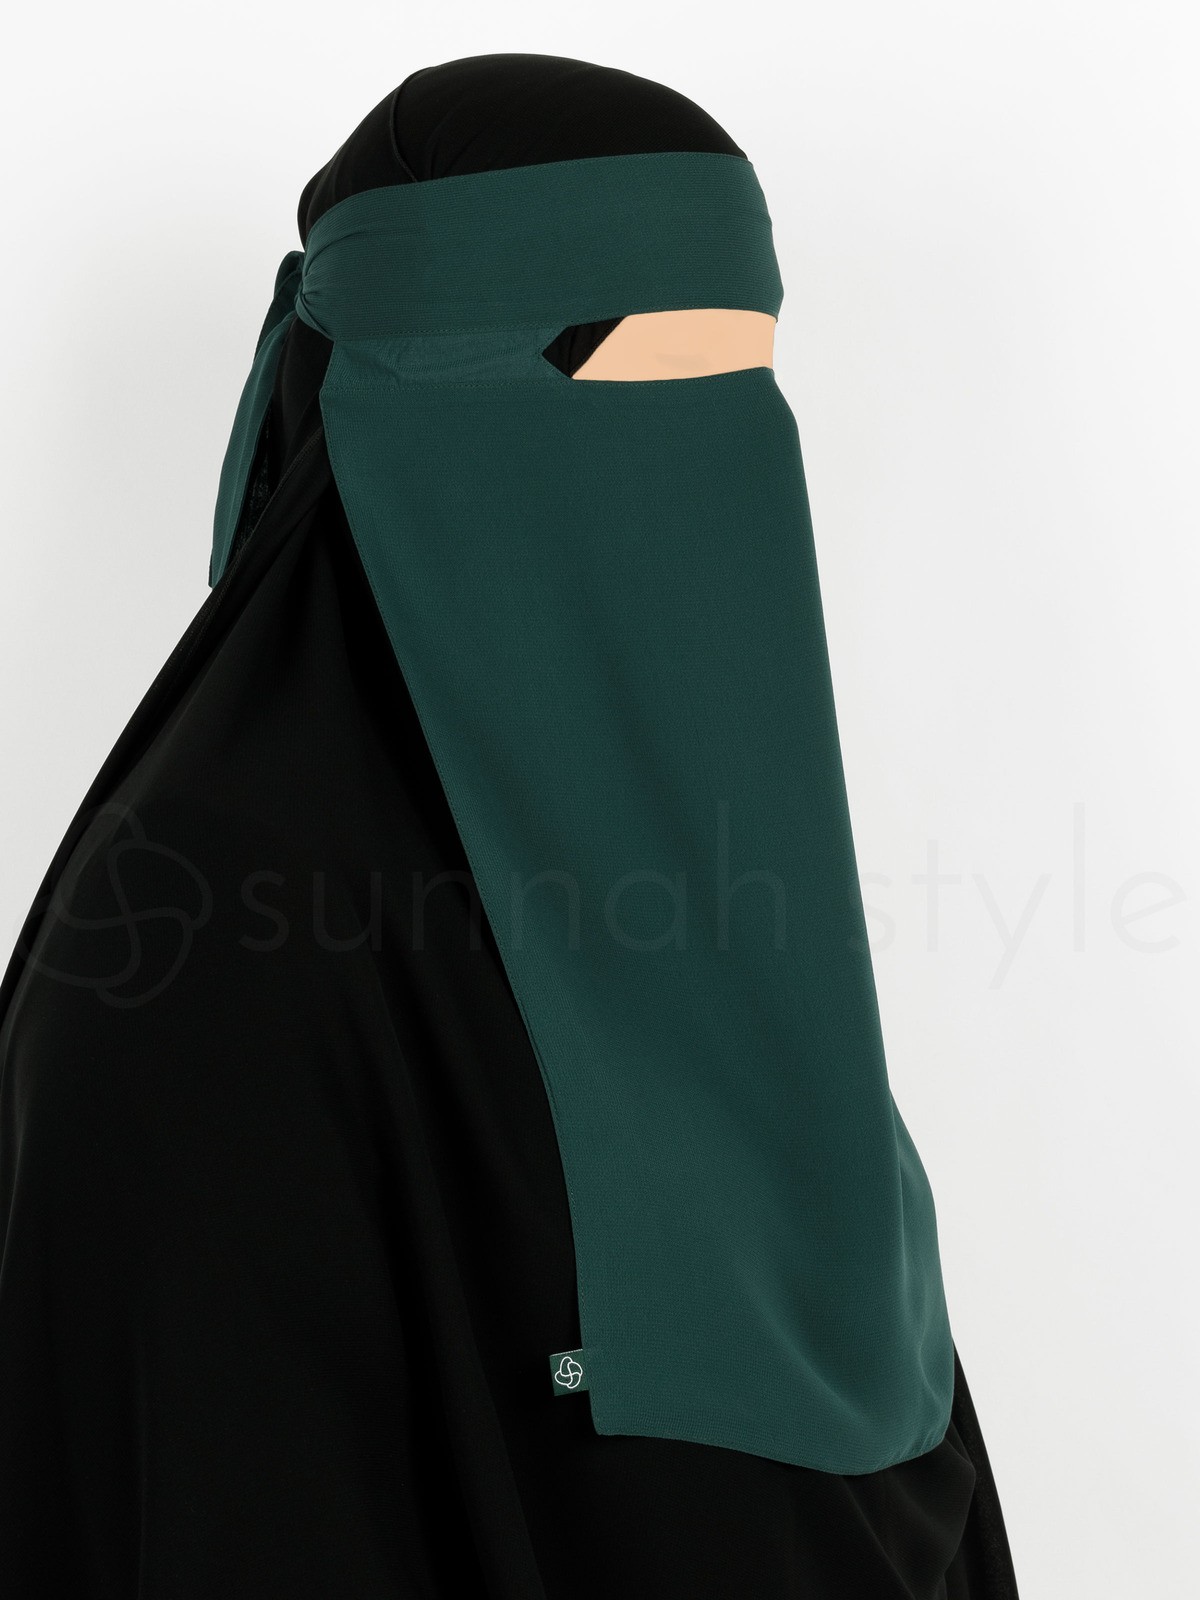 Sunnah Style - No-Pinch One Layer Niqab (Pine)